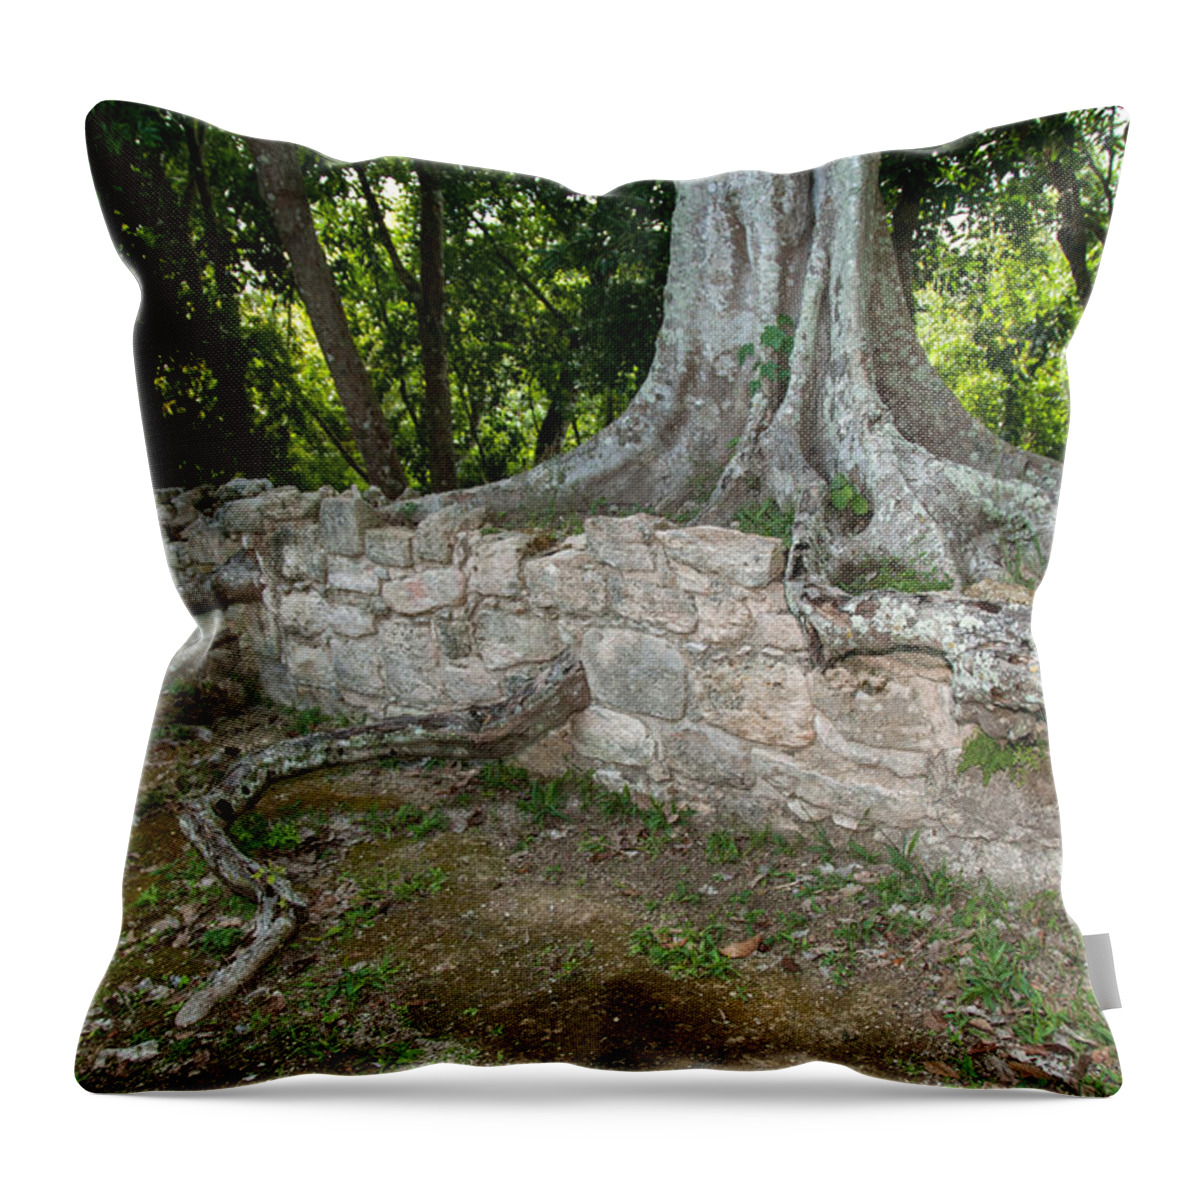 Mexico Quintana Roo Throw Pillow featuring the digital art Tree growing through the Ruins in Oxtankah by Carol Ailles